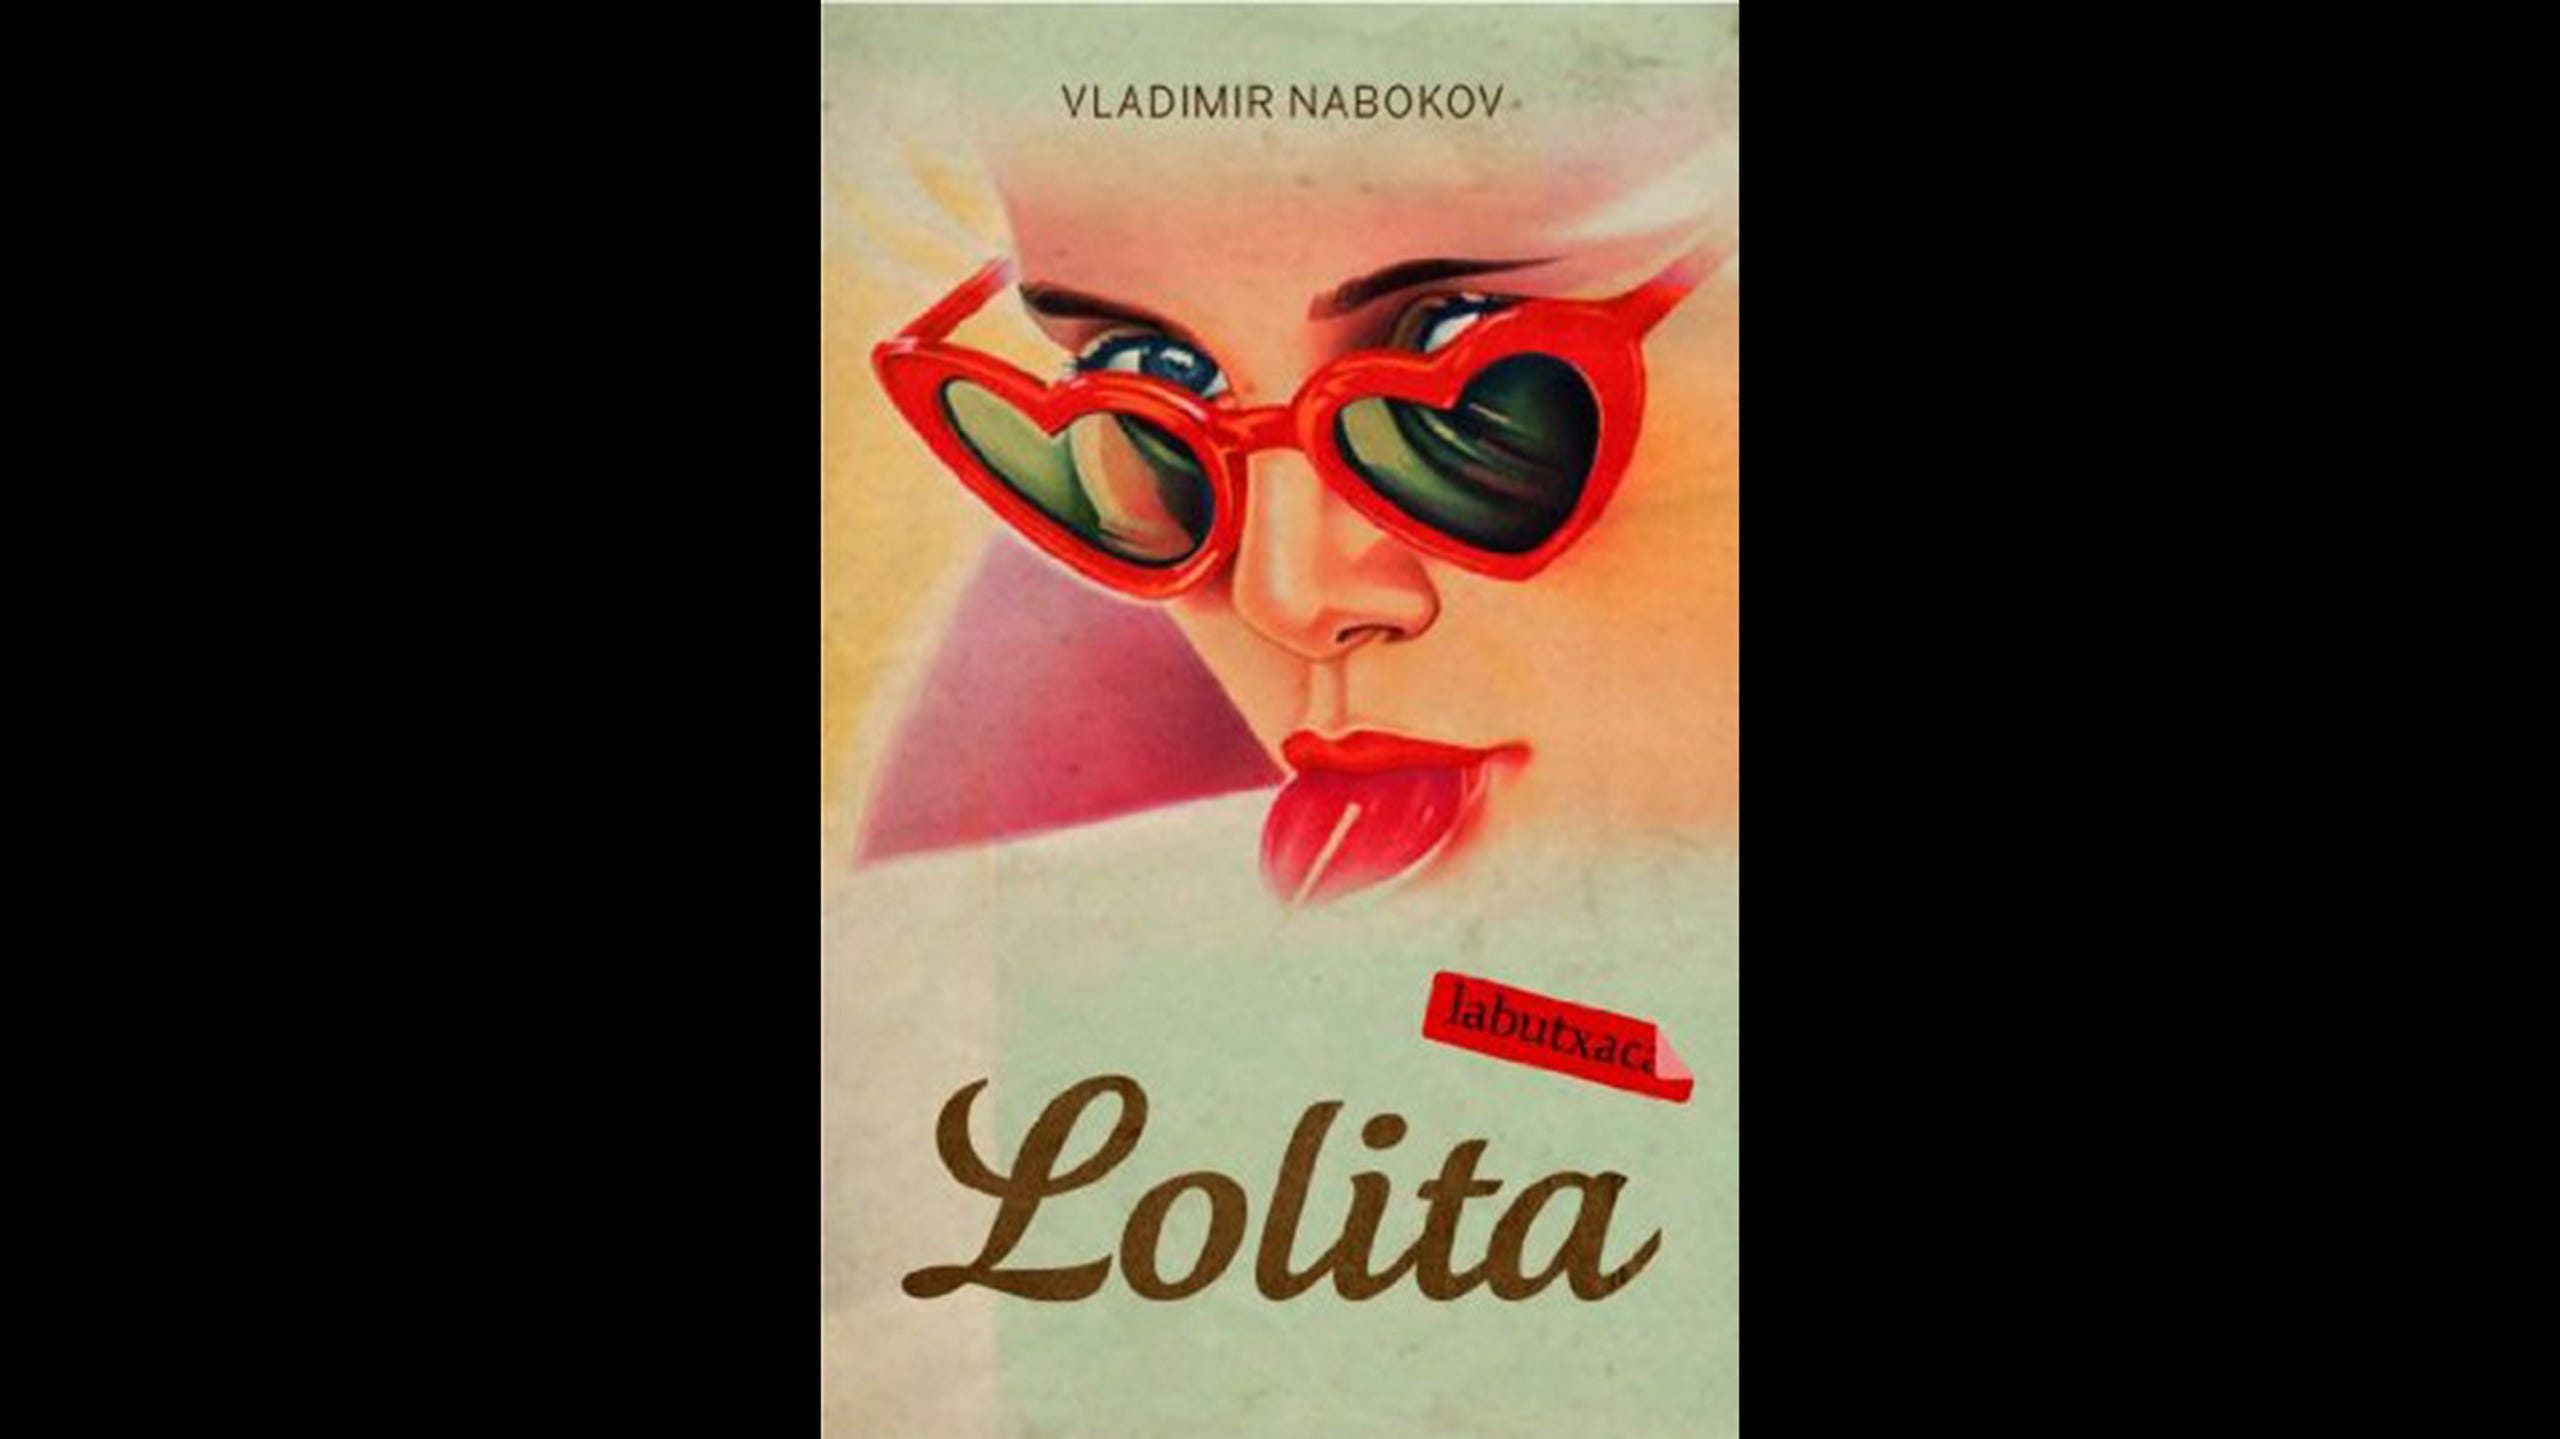 <strong>14. Lolita </strong><strong>• Author:</strong> Vladimir Nabokov <strong>• Originally published in:</strong> 1955 <strong>• </strong>It's not uncommon to use literature to introduce and discuss taboo subjects. "Lolita," which became a sensation after its publication in America in 1958, had been called a "disturbing masterpiece." It's about a man's love obsession with his 12-year-old stepdaughter. The book is complicated on many levels and it lets people explore a side of the psyche that would otherwise be disregarded.